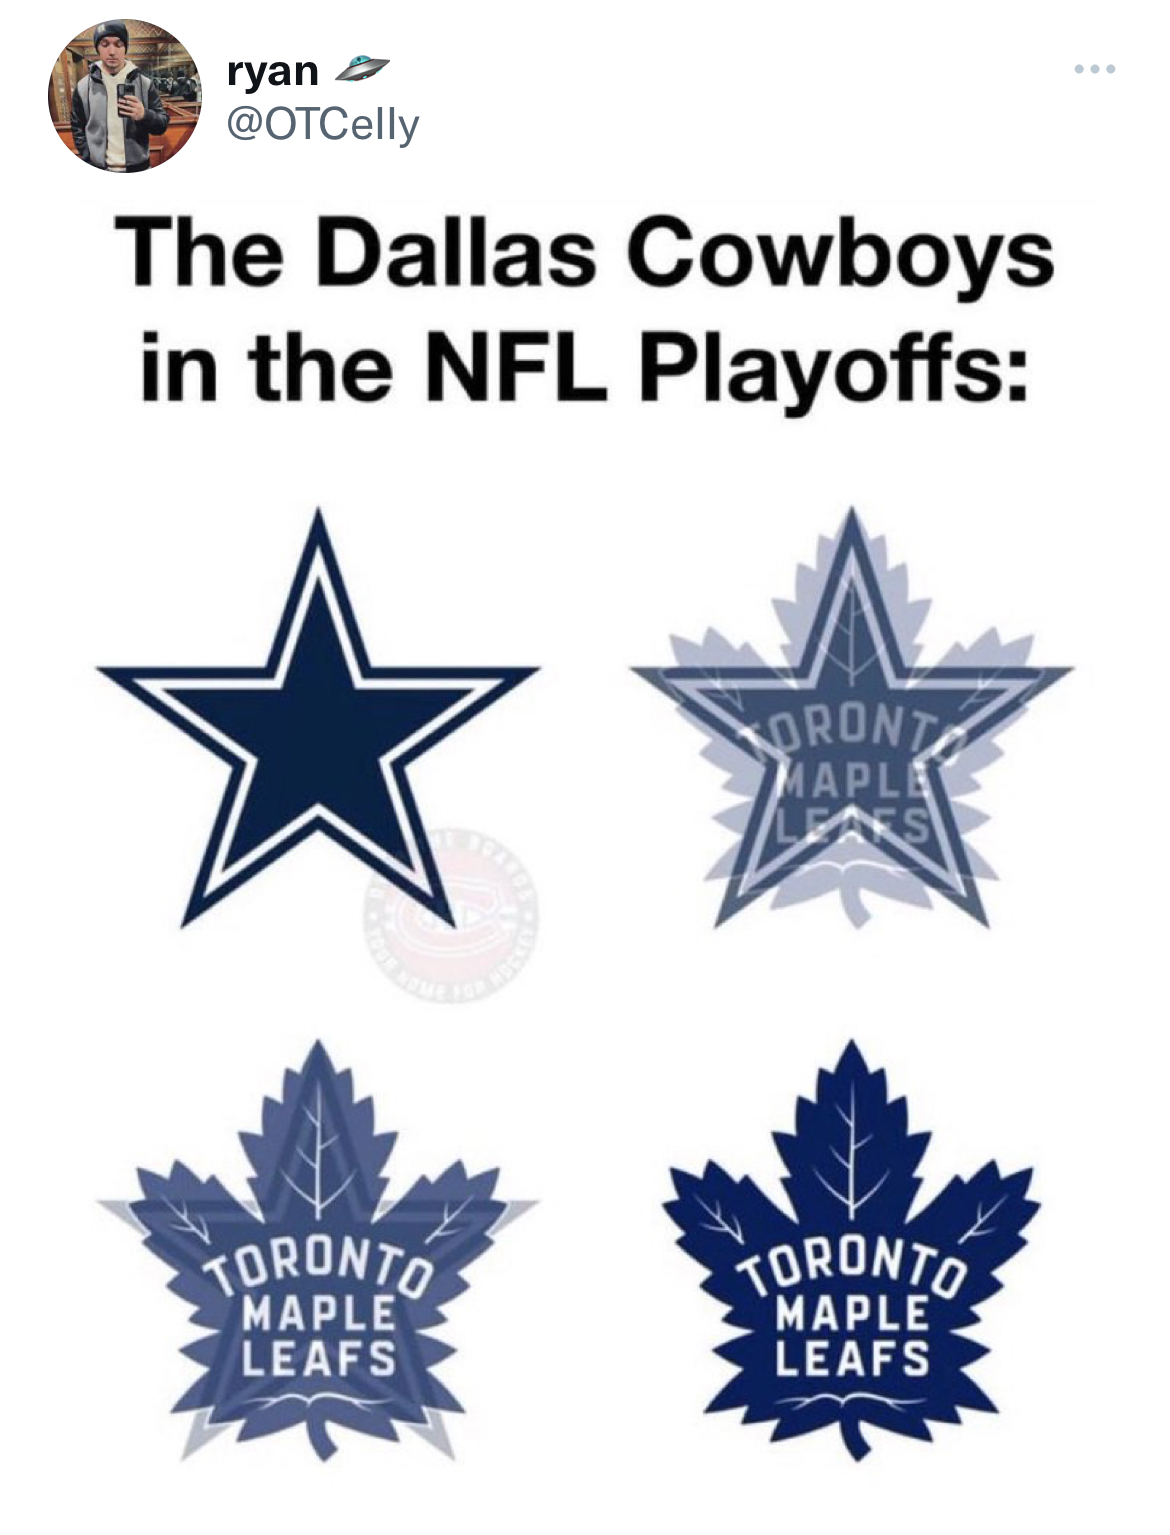 tweets dunking on celebs - toronto maple leafs new - ryan >> The Dallas Cowboys in the Nfl Playoffs Toronto Maple Leafs Oront Maple Fars Toronto Maple Leafs